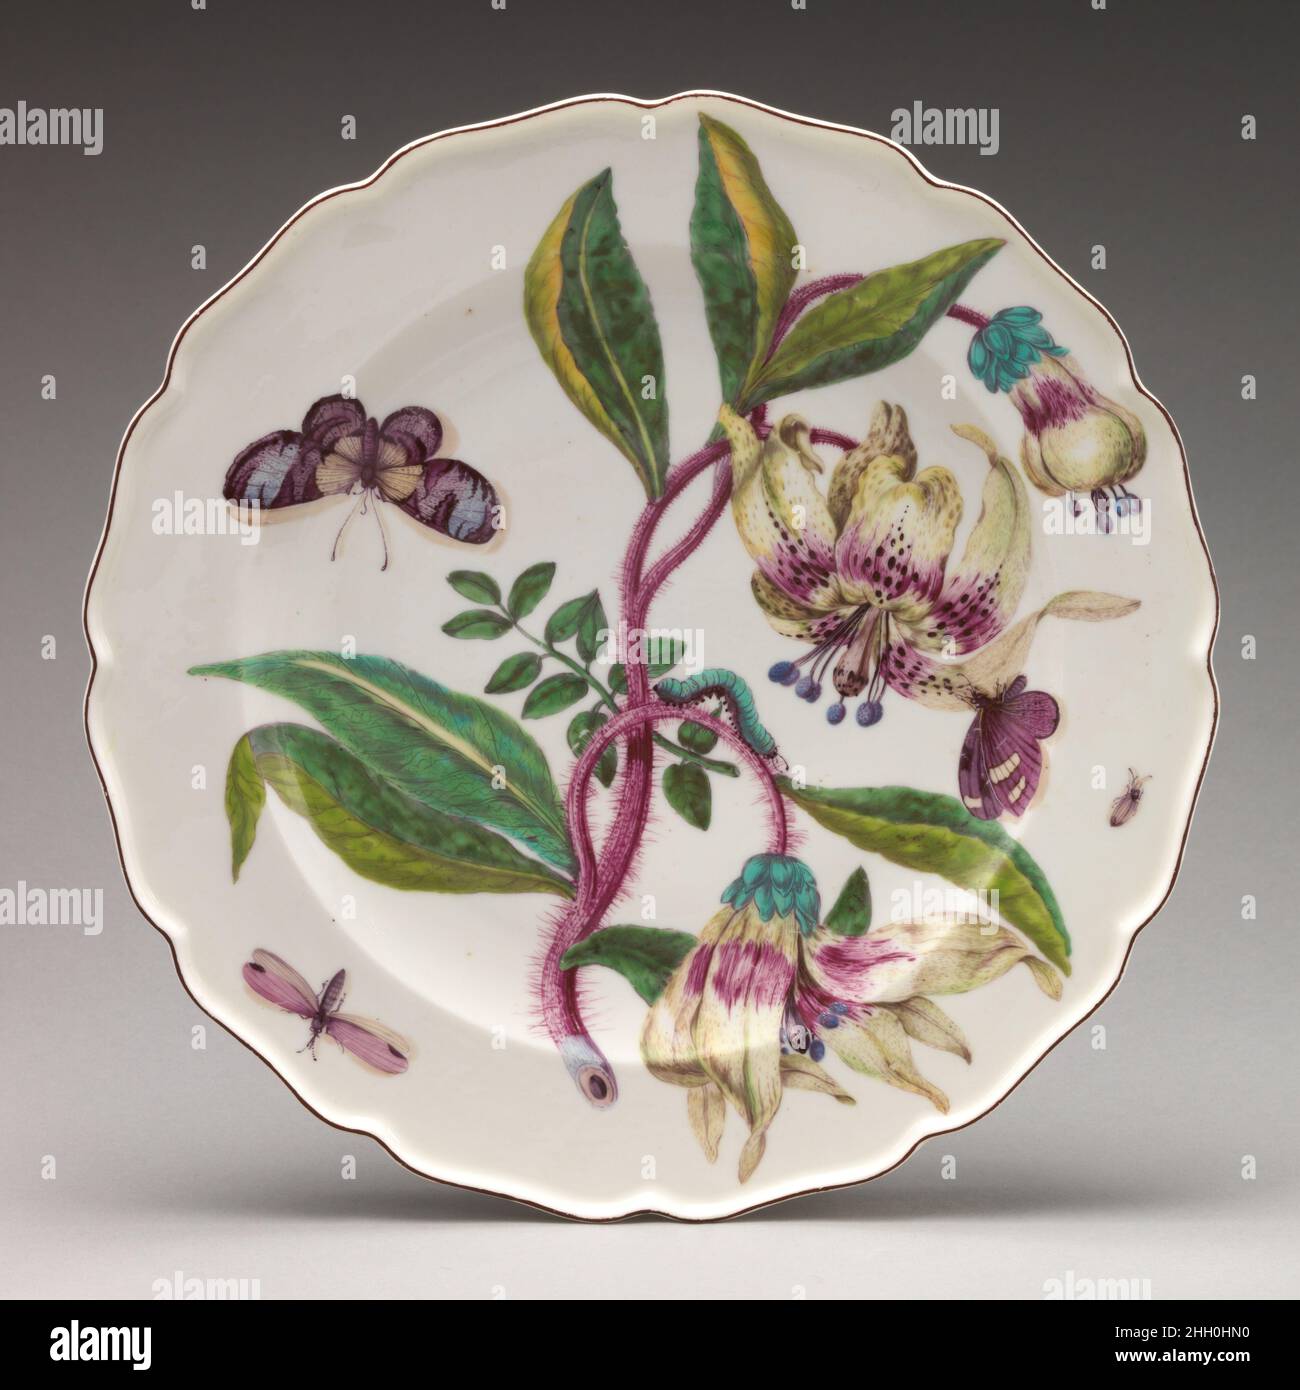 Botanical plate with spray of lilies ca. 1755 Chelsea Porcelain Manufactory In the early 1750s the Chelsea factory began looking to botanical prints as sources for its painted decoration. The plants, flowers, fruits, and vegetables chosen to decorate many of the factory’s wares over an approximately five-year period beginning in 1752 constitute one of the most recognized and appreciated types of decoration employed at Chelsea during the factory’s history. Other porcelain factories, notably Meissen, had practiced botanical decoration prior to its appearance at Chelsea, but the Chelsea painters Stock Photo